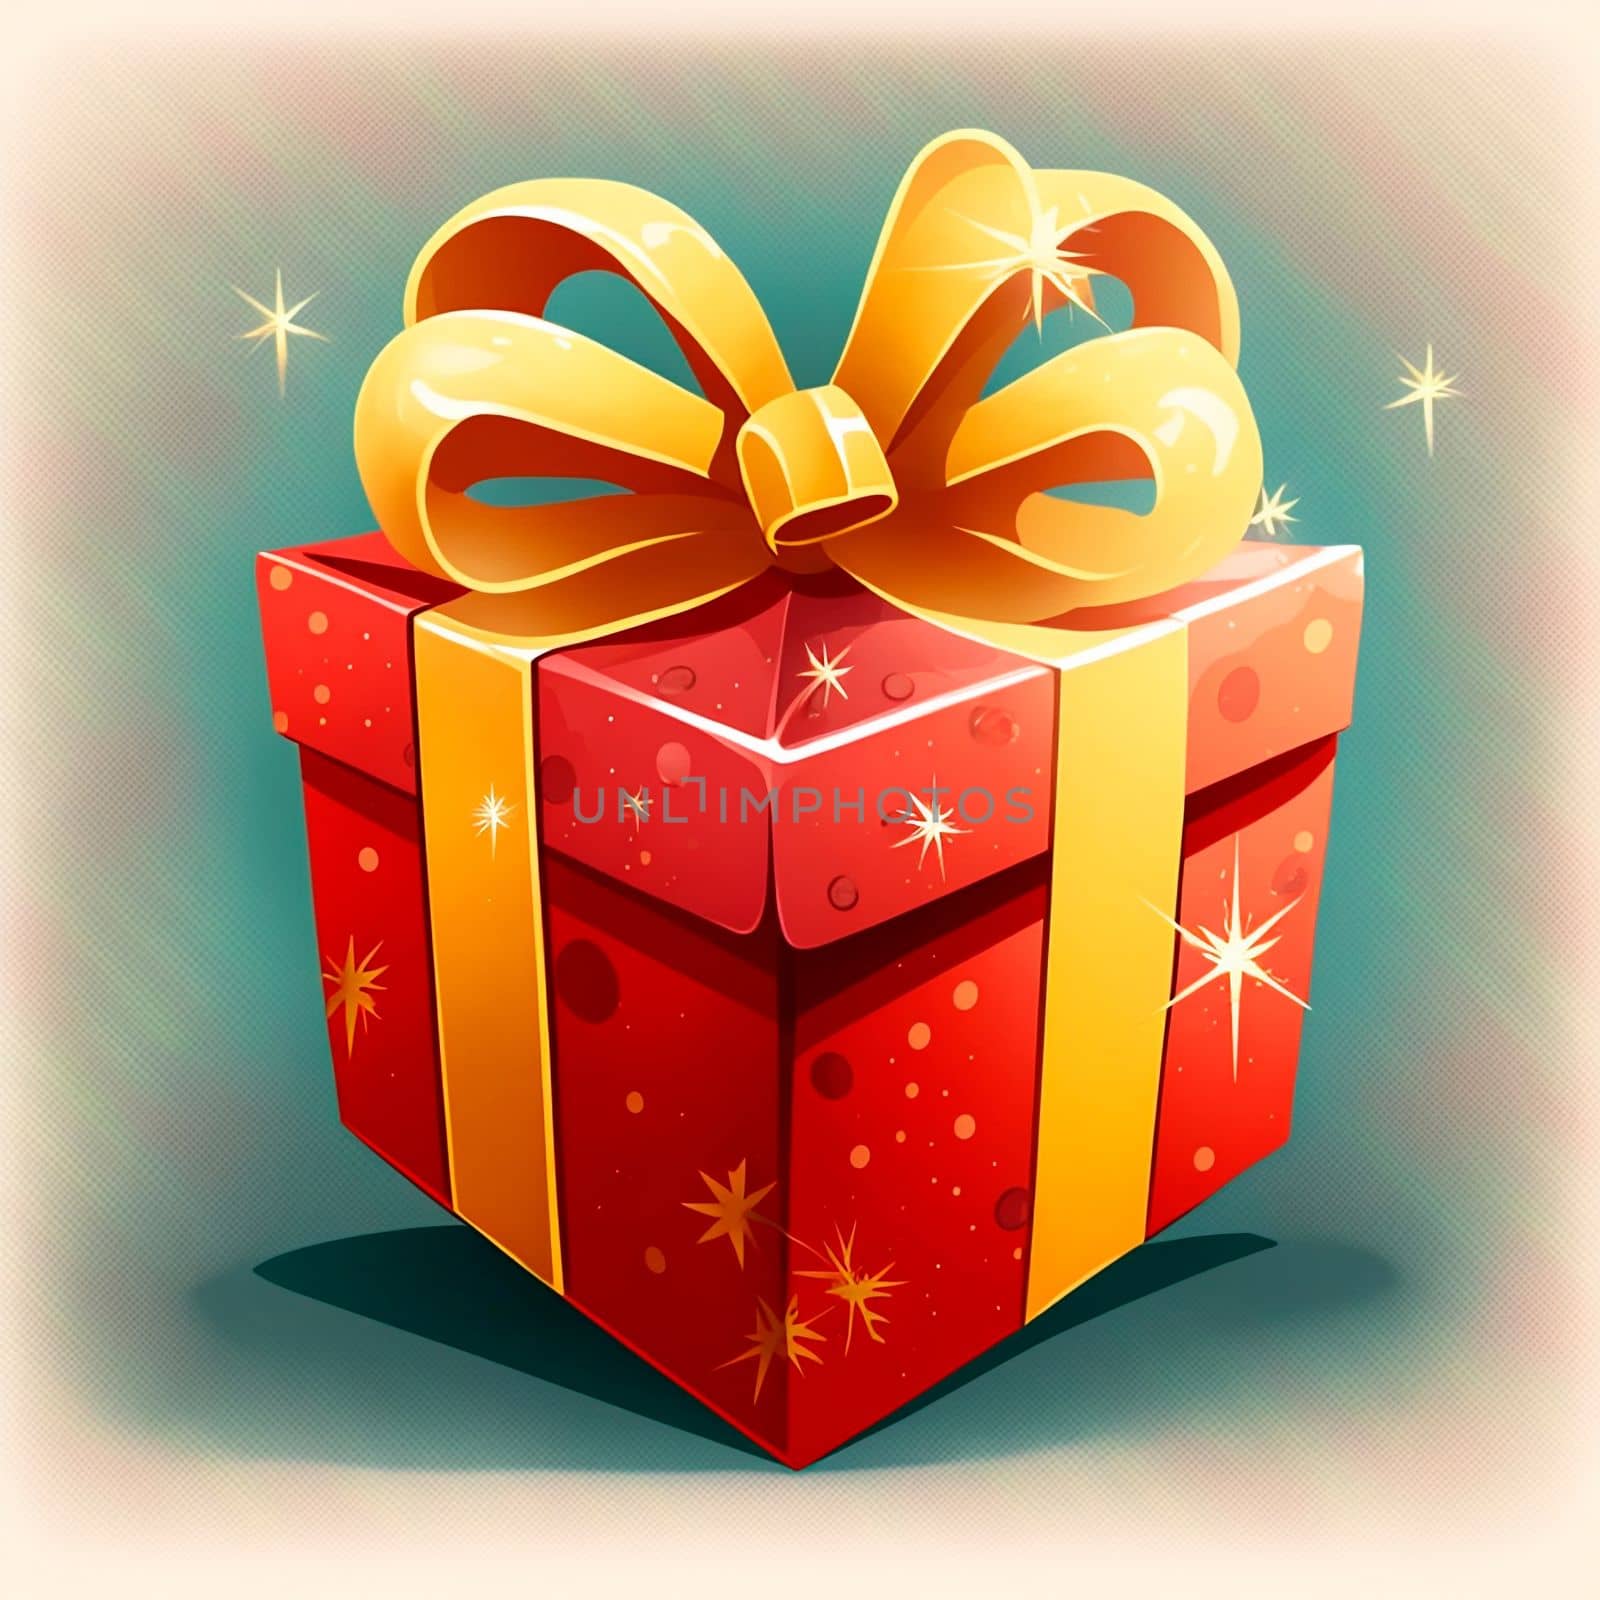 Colorful illustration of a Christmas gift by NeuroSky